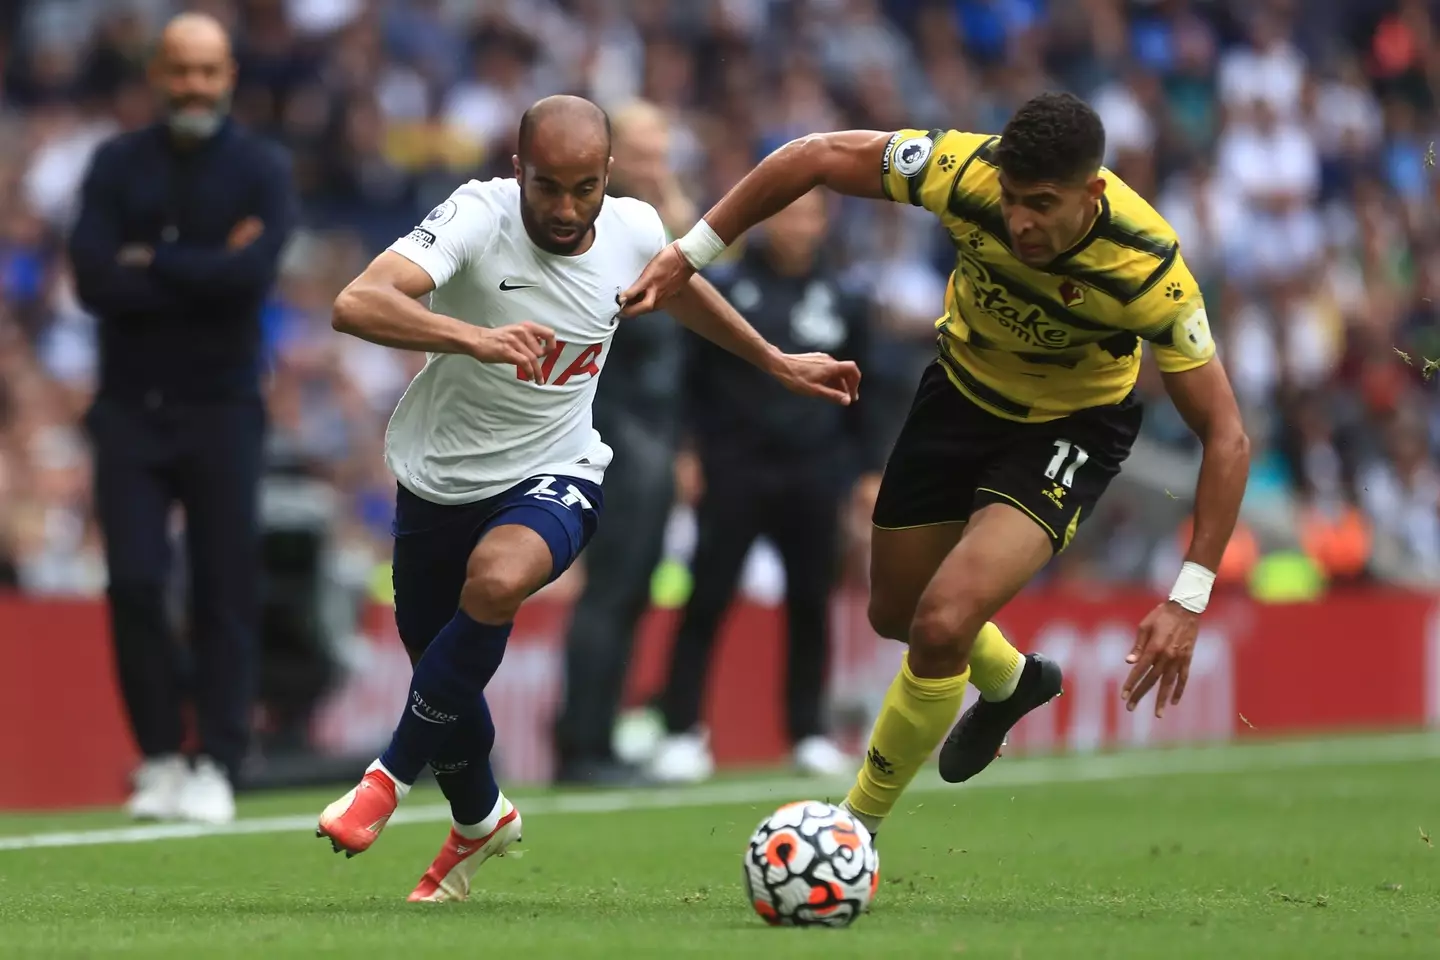 Lucas Moura has looked lively in Spurs' opening three games and will be itching to get off the mark